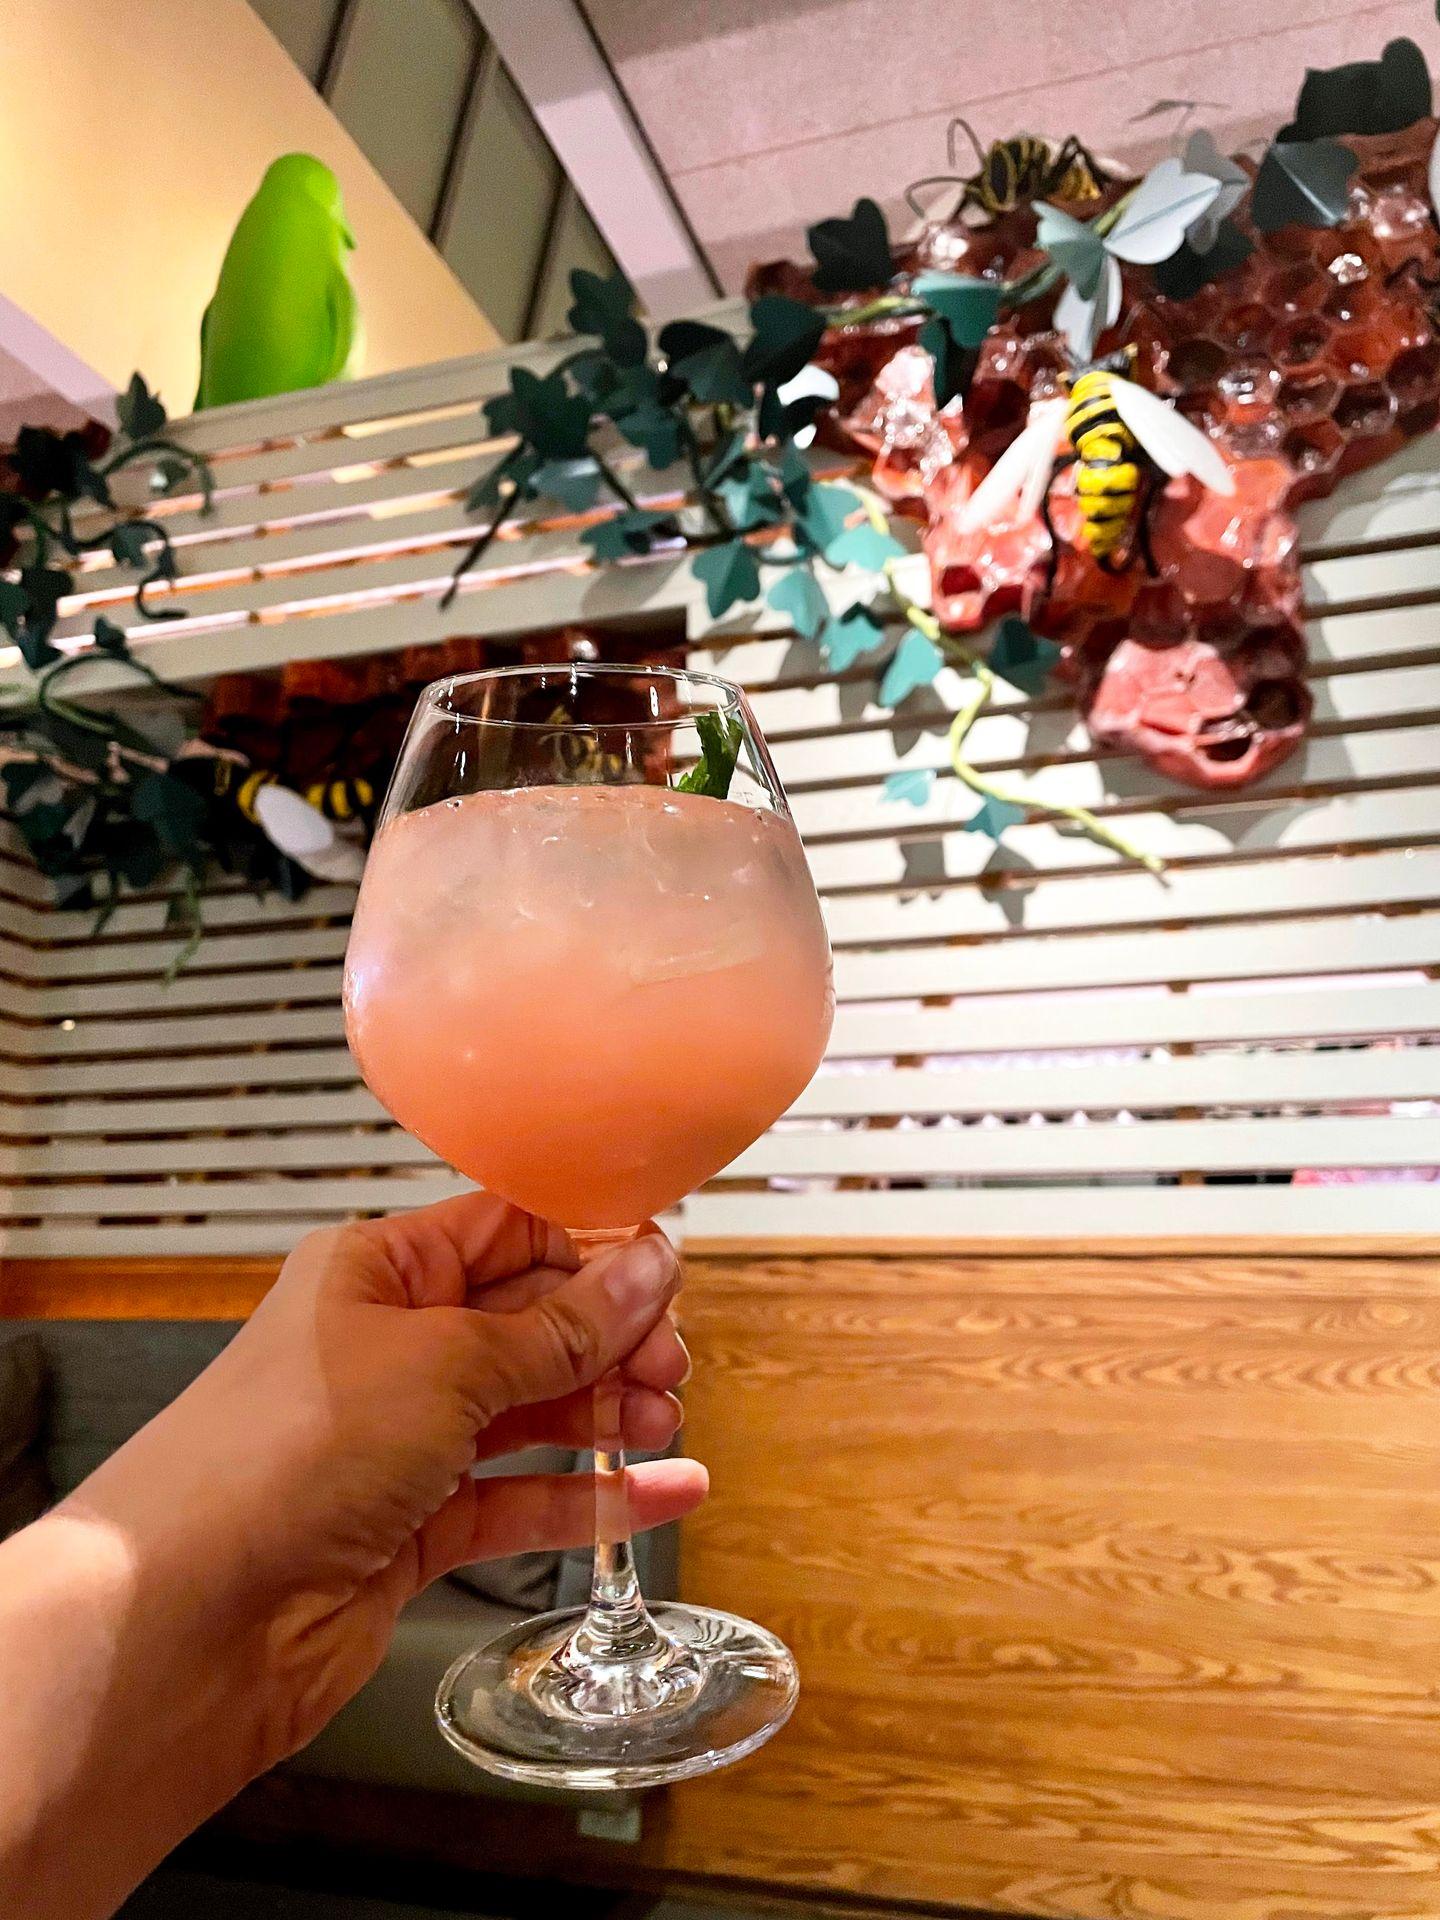 Holding up a pink cocktail inside of The Hive. There is artwork that resembles a beehive and plants hanging from the wall and a green penguin up high facing the other way.